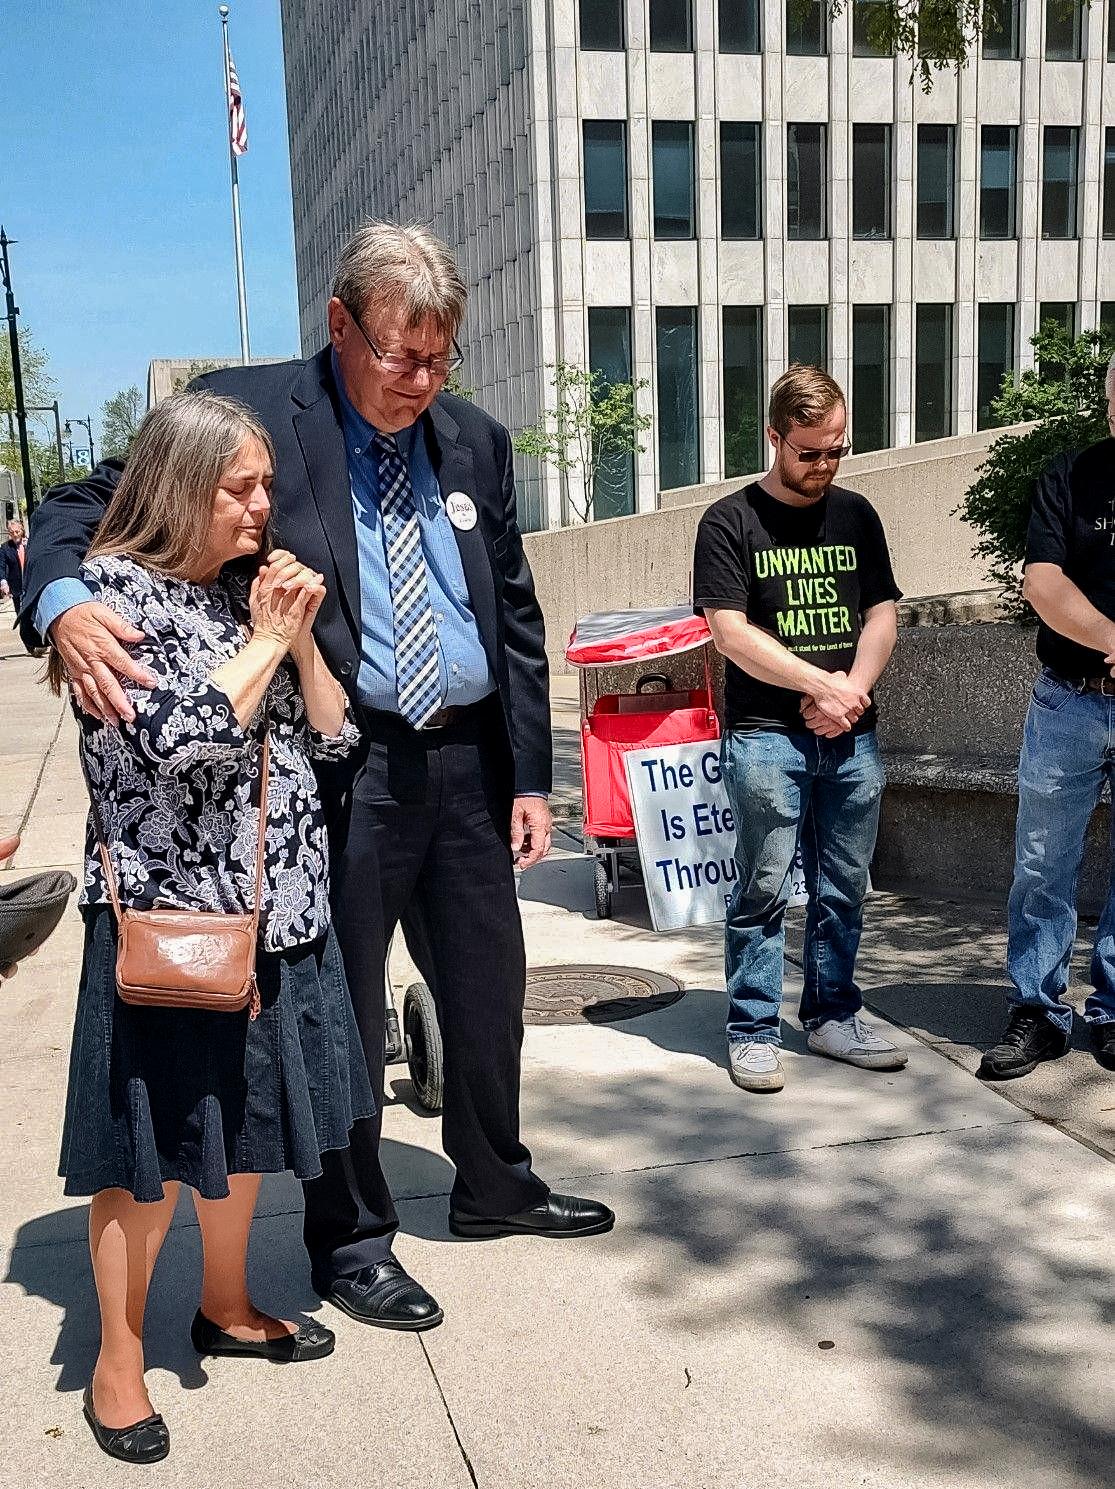 Trish and Calvin Zastrow, along with supporters, pray before entering court in Grand Rapids, Mich., on May 11, 2023. (Courtesy of Cal Zastrow)